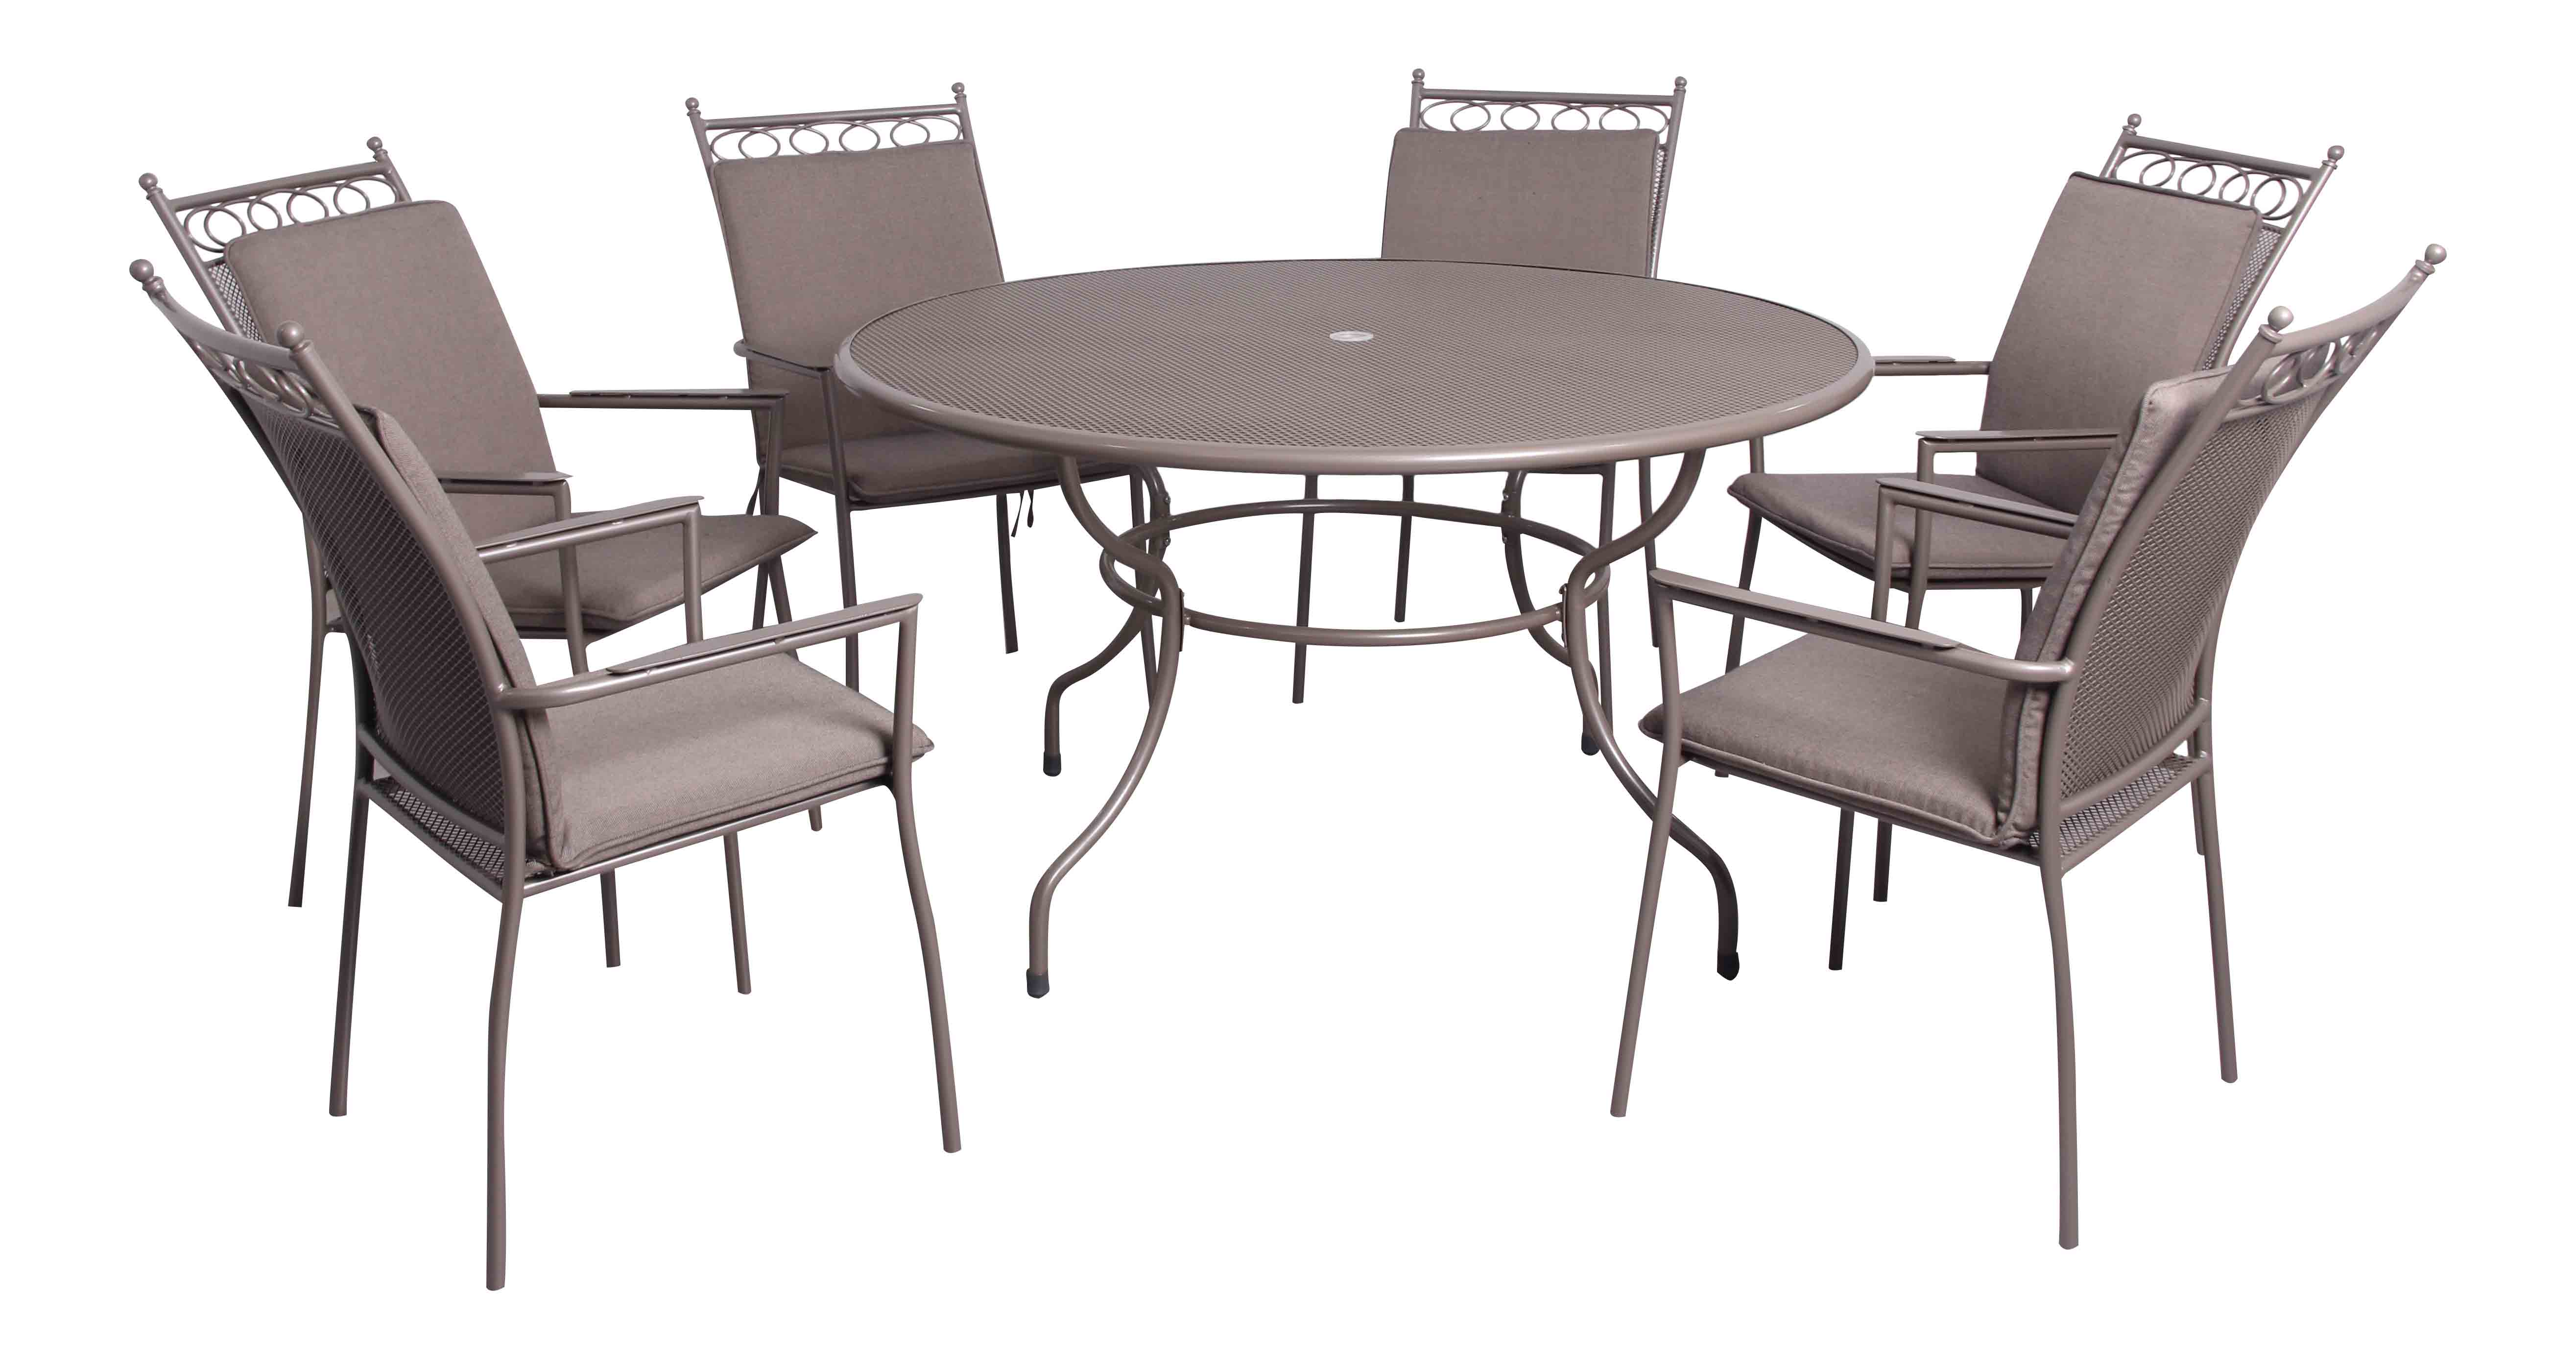 LG Outdoor Richmond 6 Seat Round Dining Set Highback Armchairs and Cushions